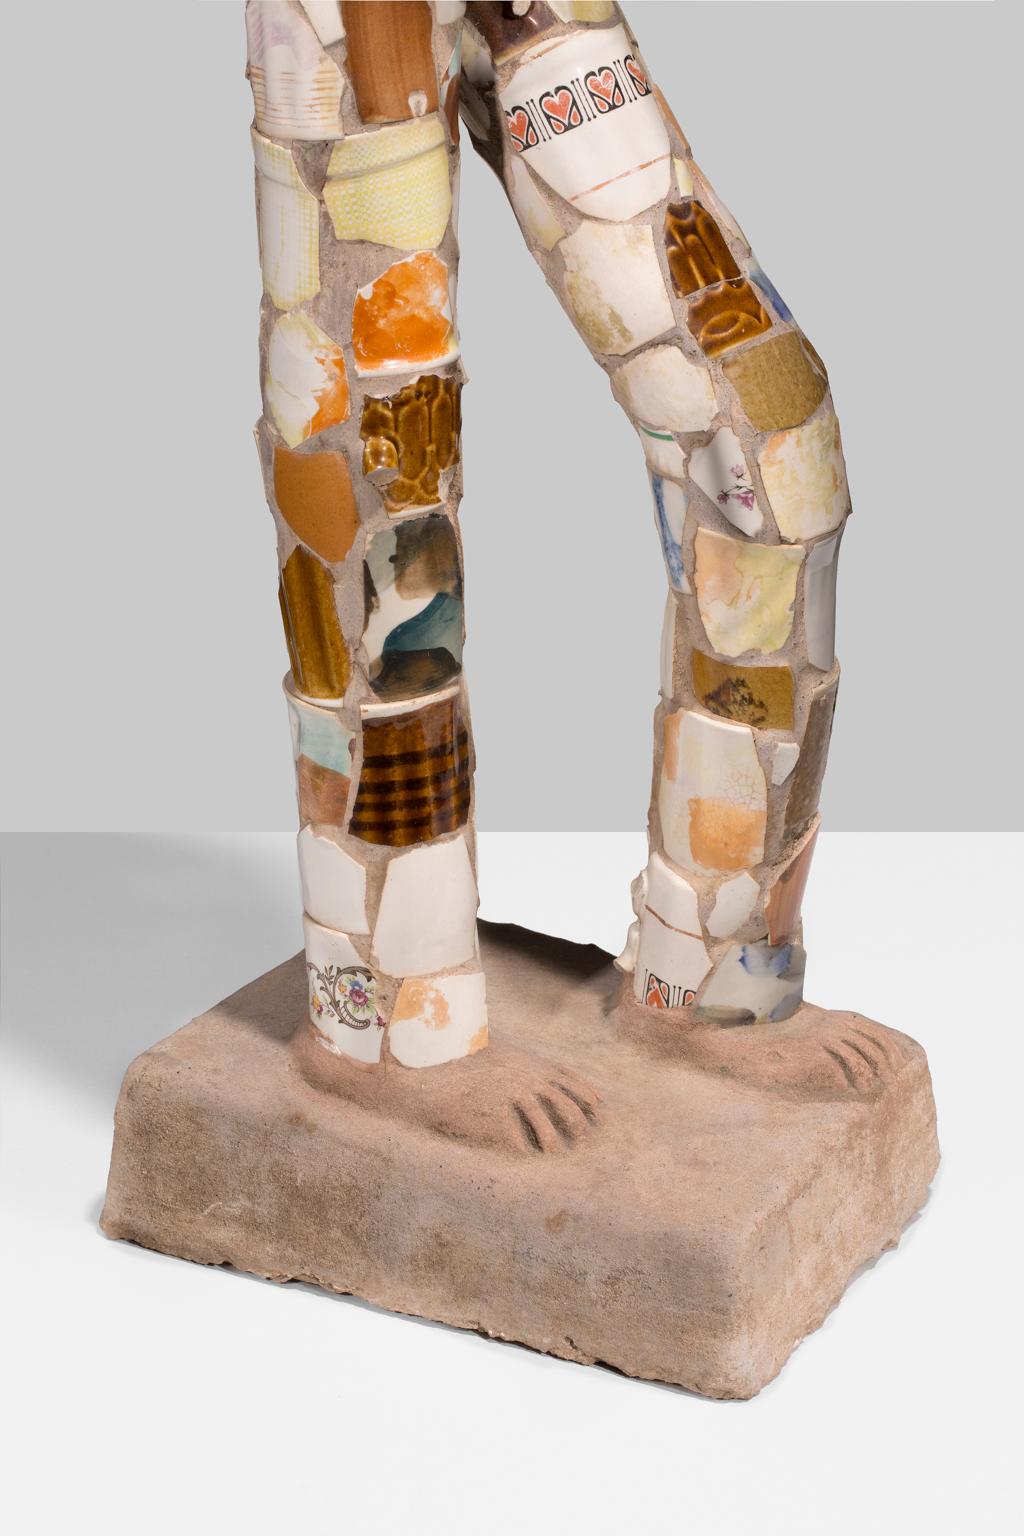 This mixed media standing figure is an outstanding example of the work of Indian artist Nek Chand. Made of various materials strew about our world, Chand constructions a three-dimensional man from the things we leave behind and the things we